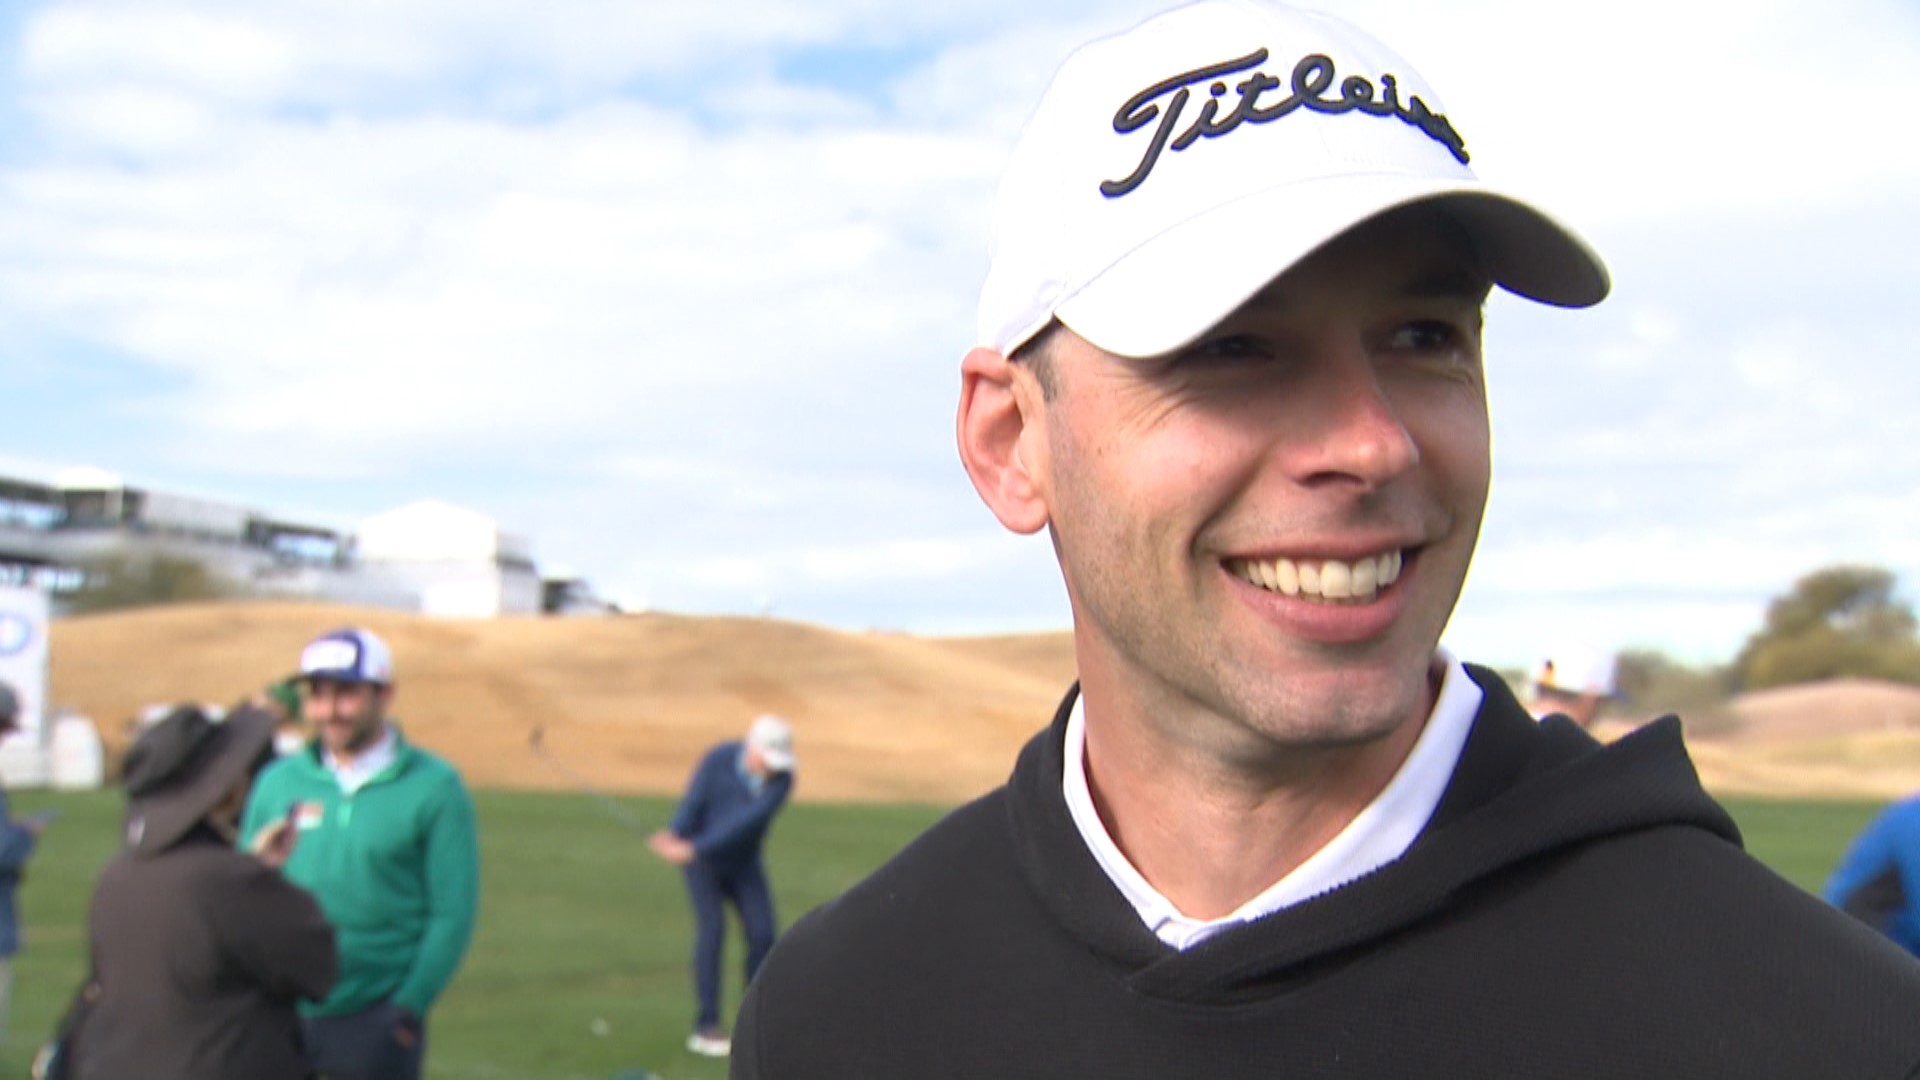 The Cardinals are in the midst of the offseason and 12News got the chance to speak with Gannon about his favorite golf shots and the moves the team needs to make